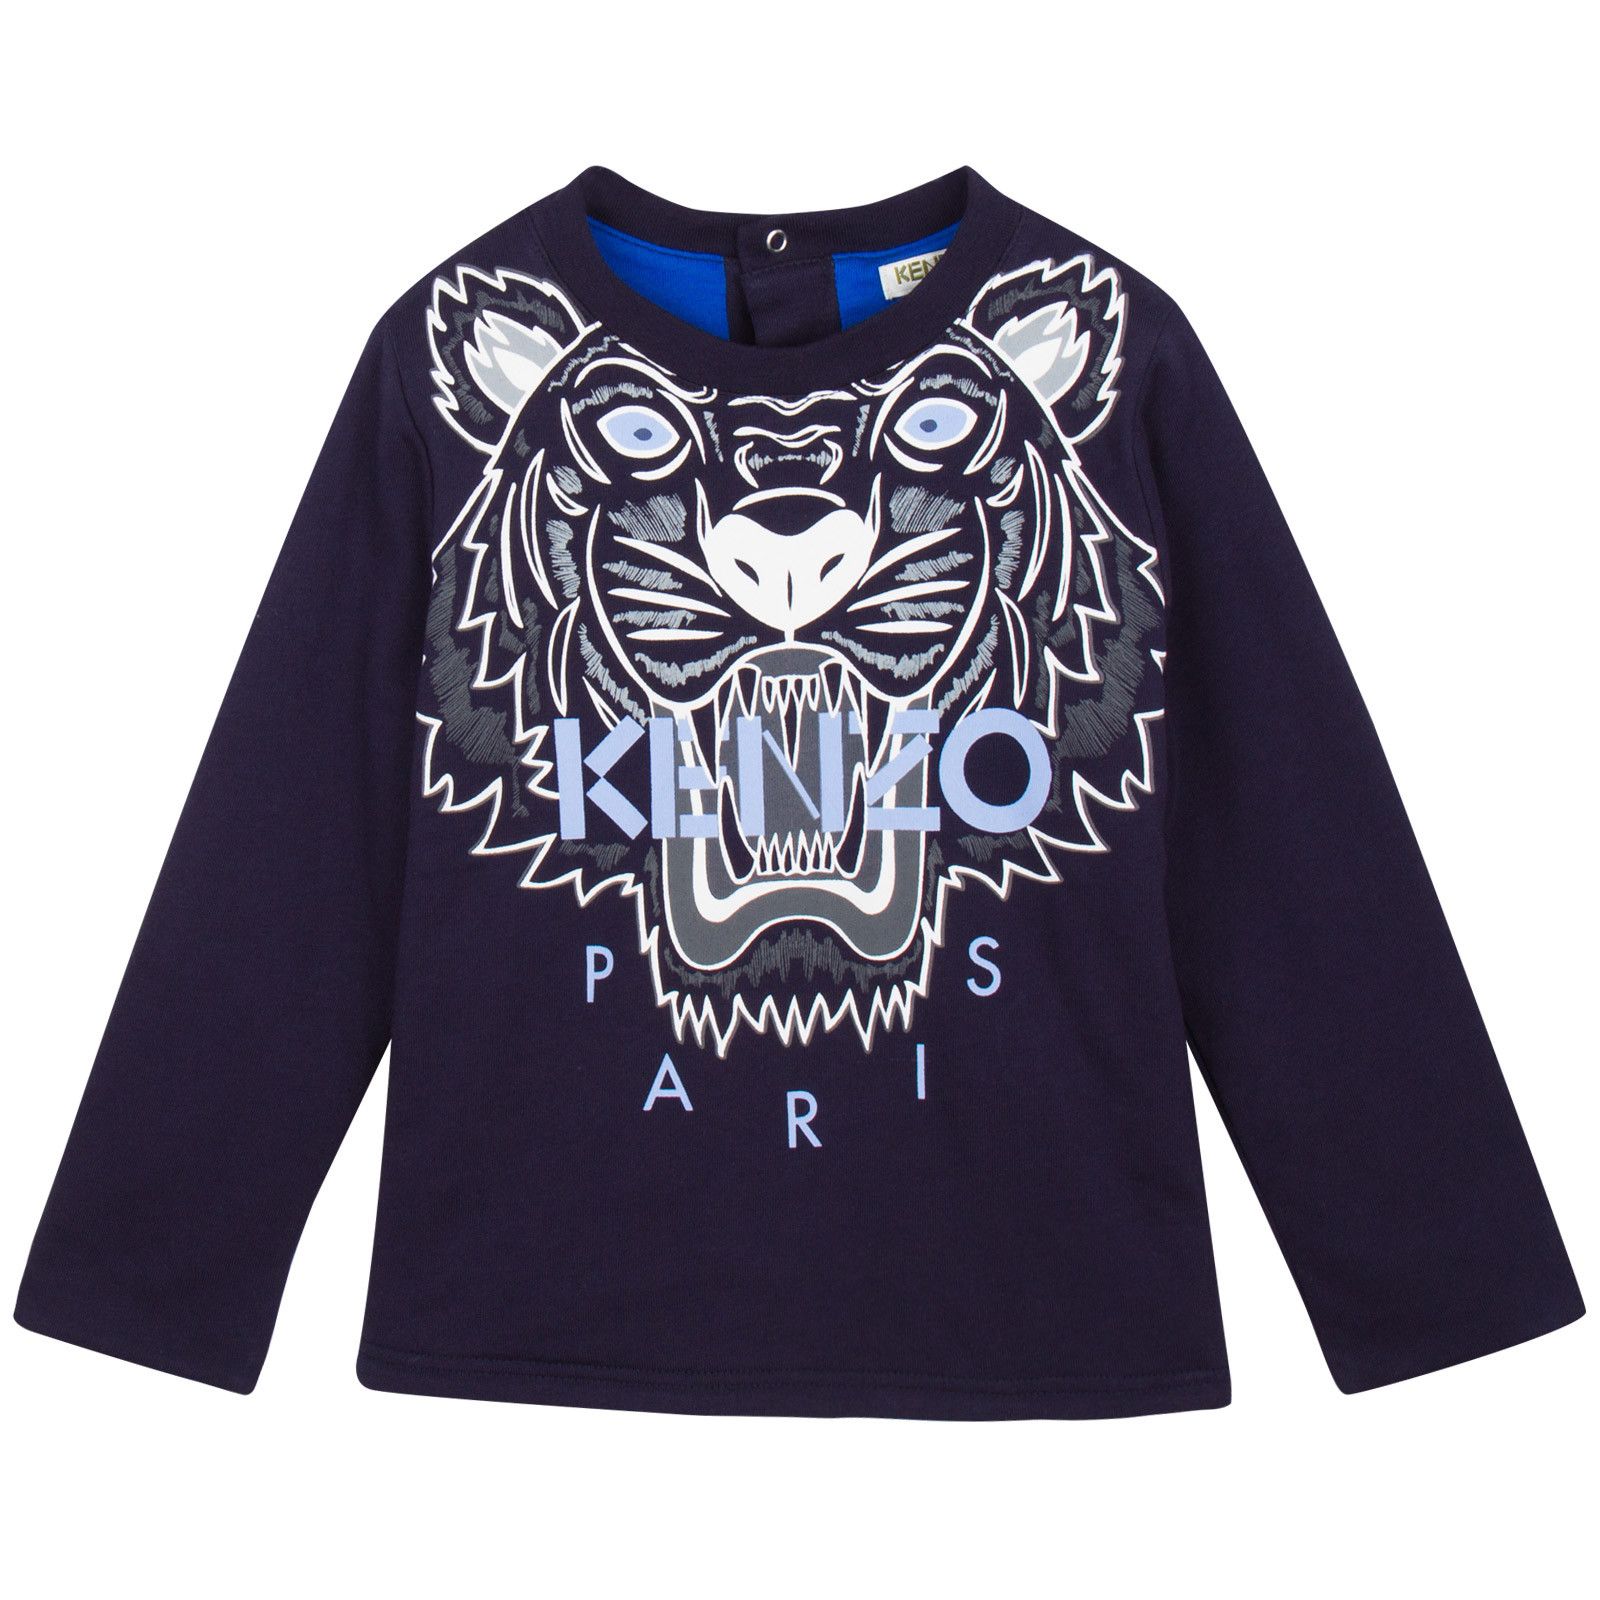 Baby Navy Blue Tiger Embroidered Sweatshirt With Blue Lining - CÉMAROSE | Children's Fashion Store - 1